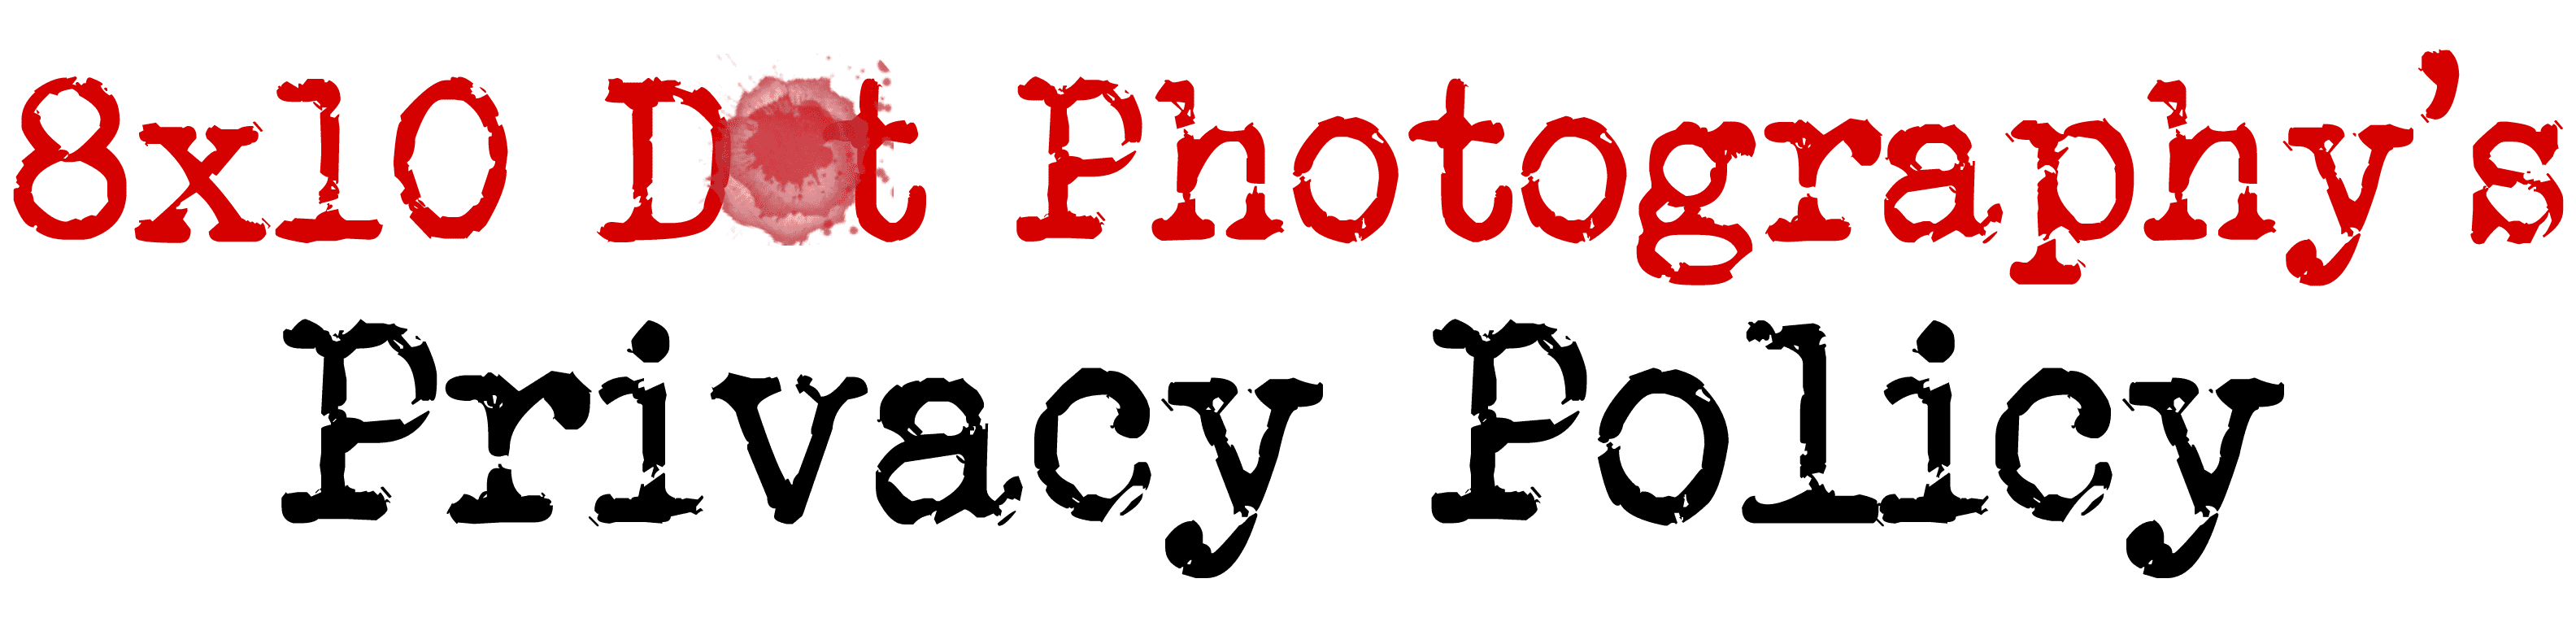 8x10 Dot Photography's Privacy Policy header title